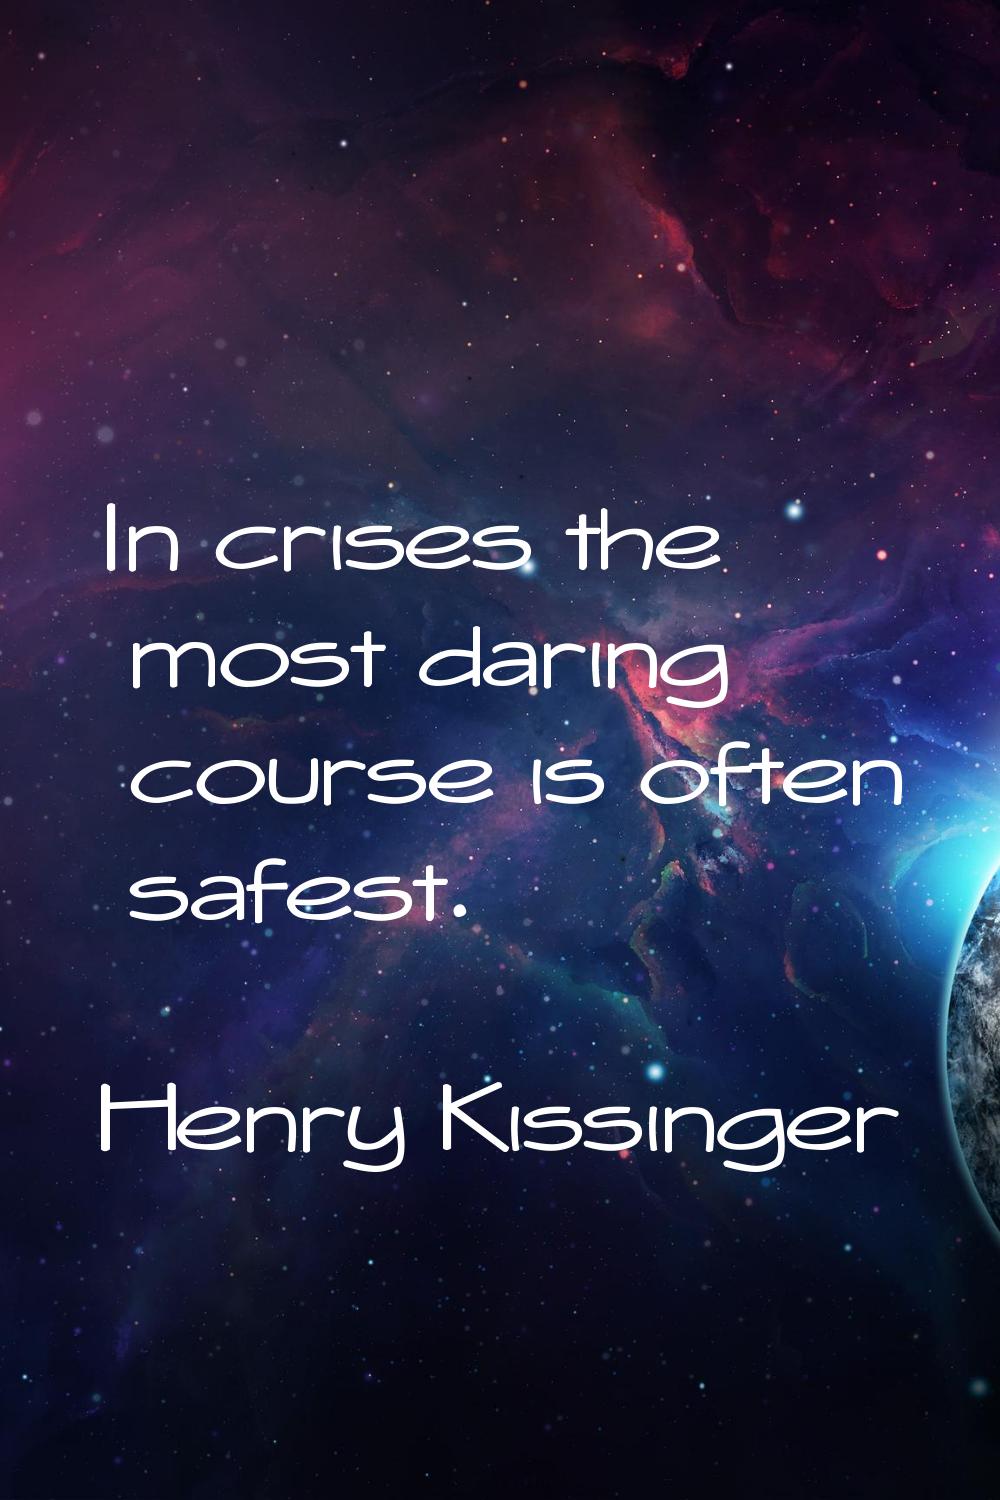 In crises the most daring course is often safest.